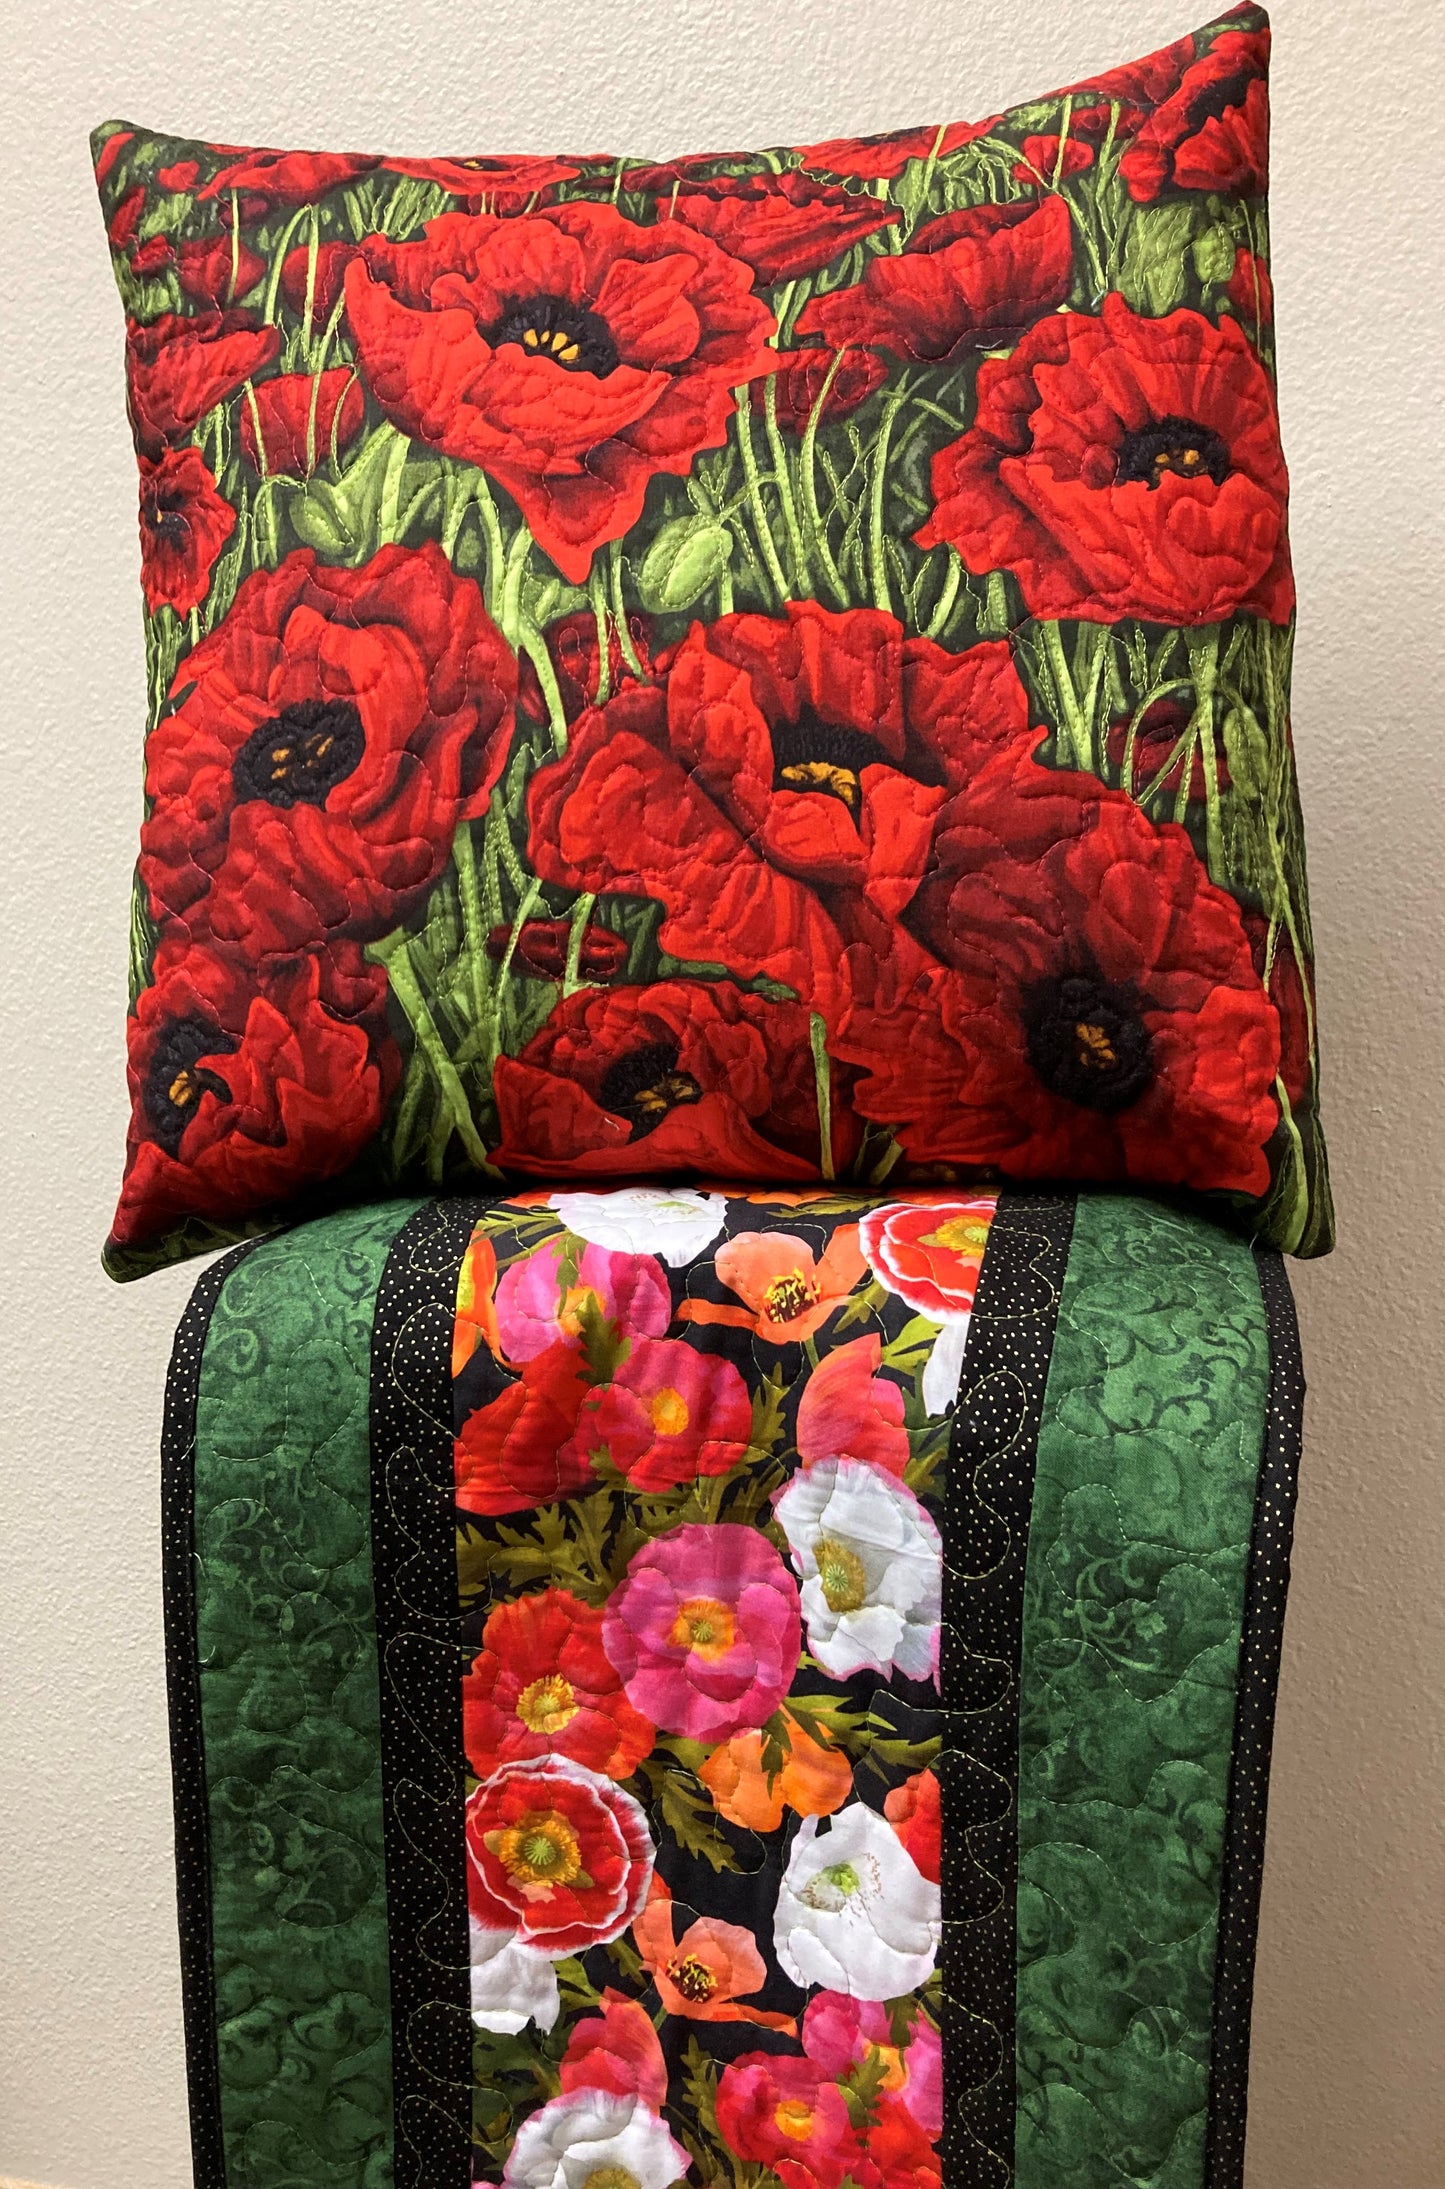 Red Poppy Quilted Fabric Art Pillow, Textile 18x18", Sofa Chair Bedroom Living Room Couch Designer Chic Red Bright Poppies Toss Throw Pillow